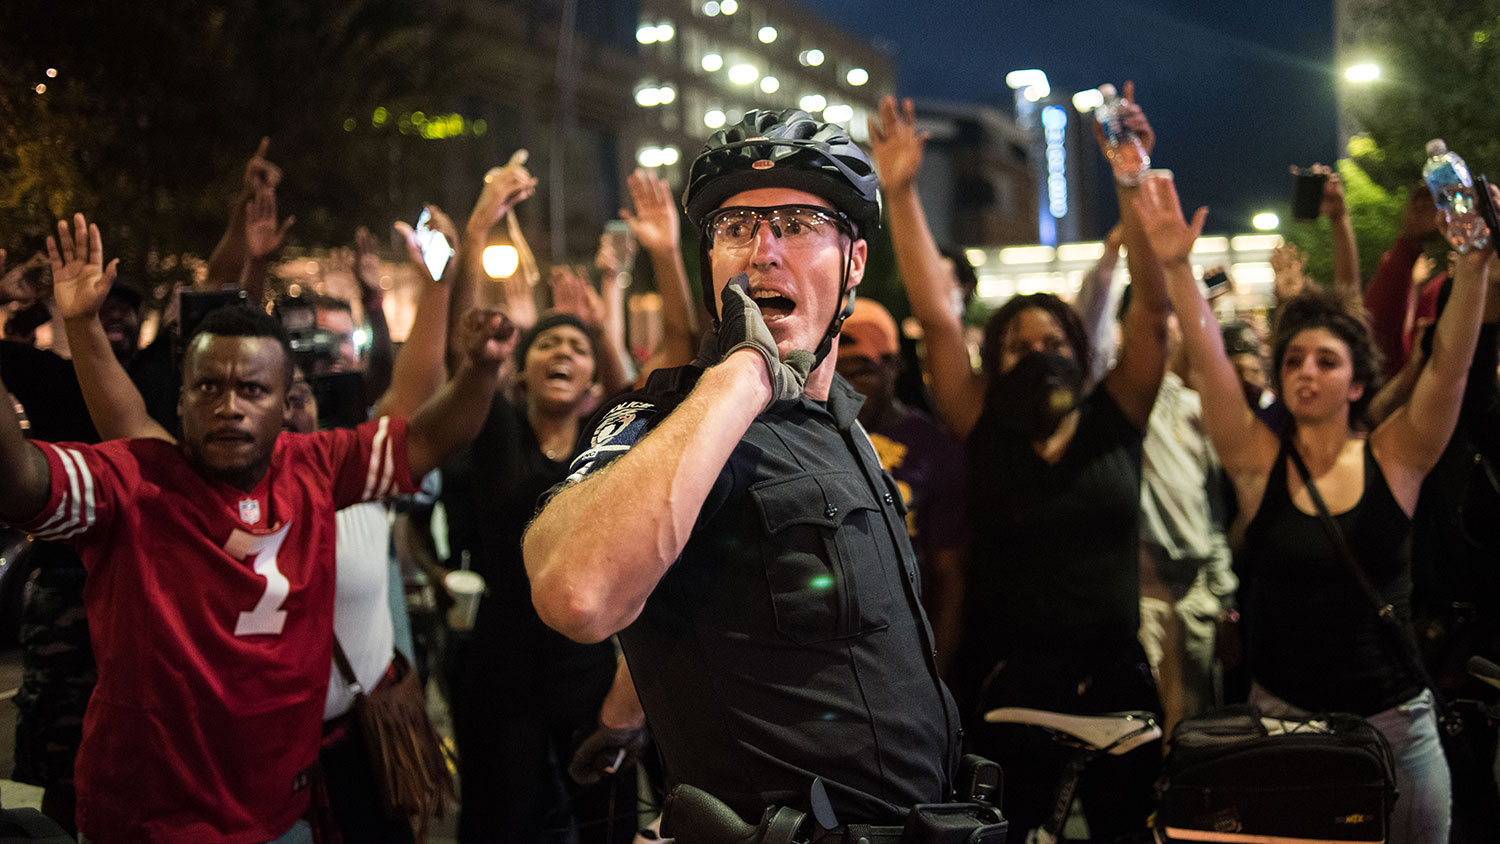 A police officer communicates with other officers on Sept. 21, 2016, in Charlotte, North Carolina.
